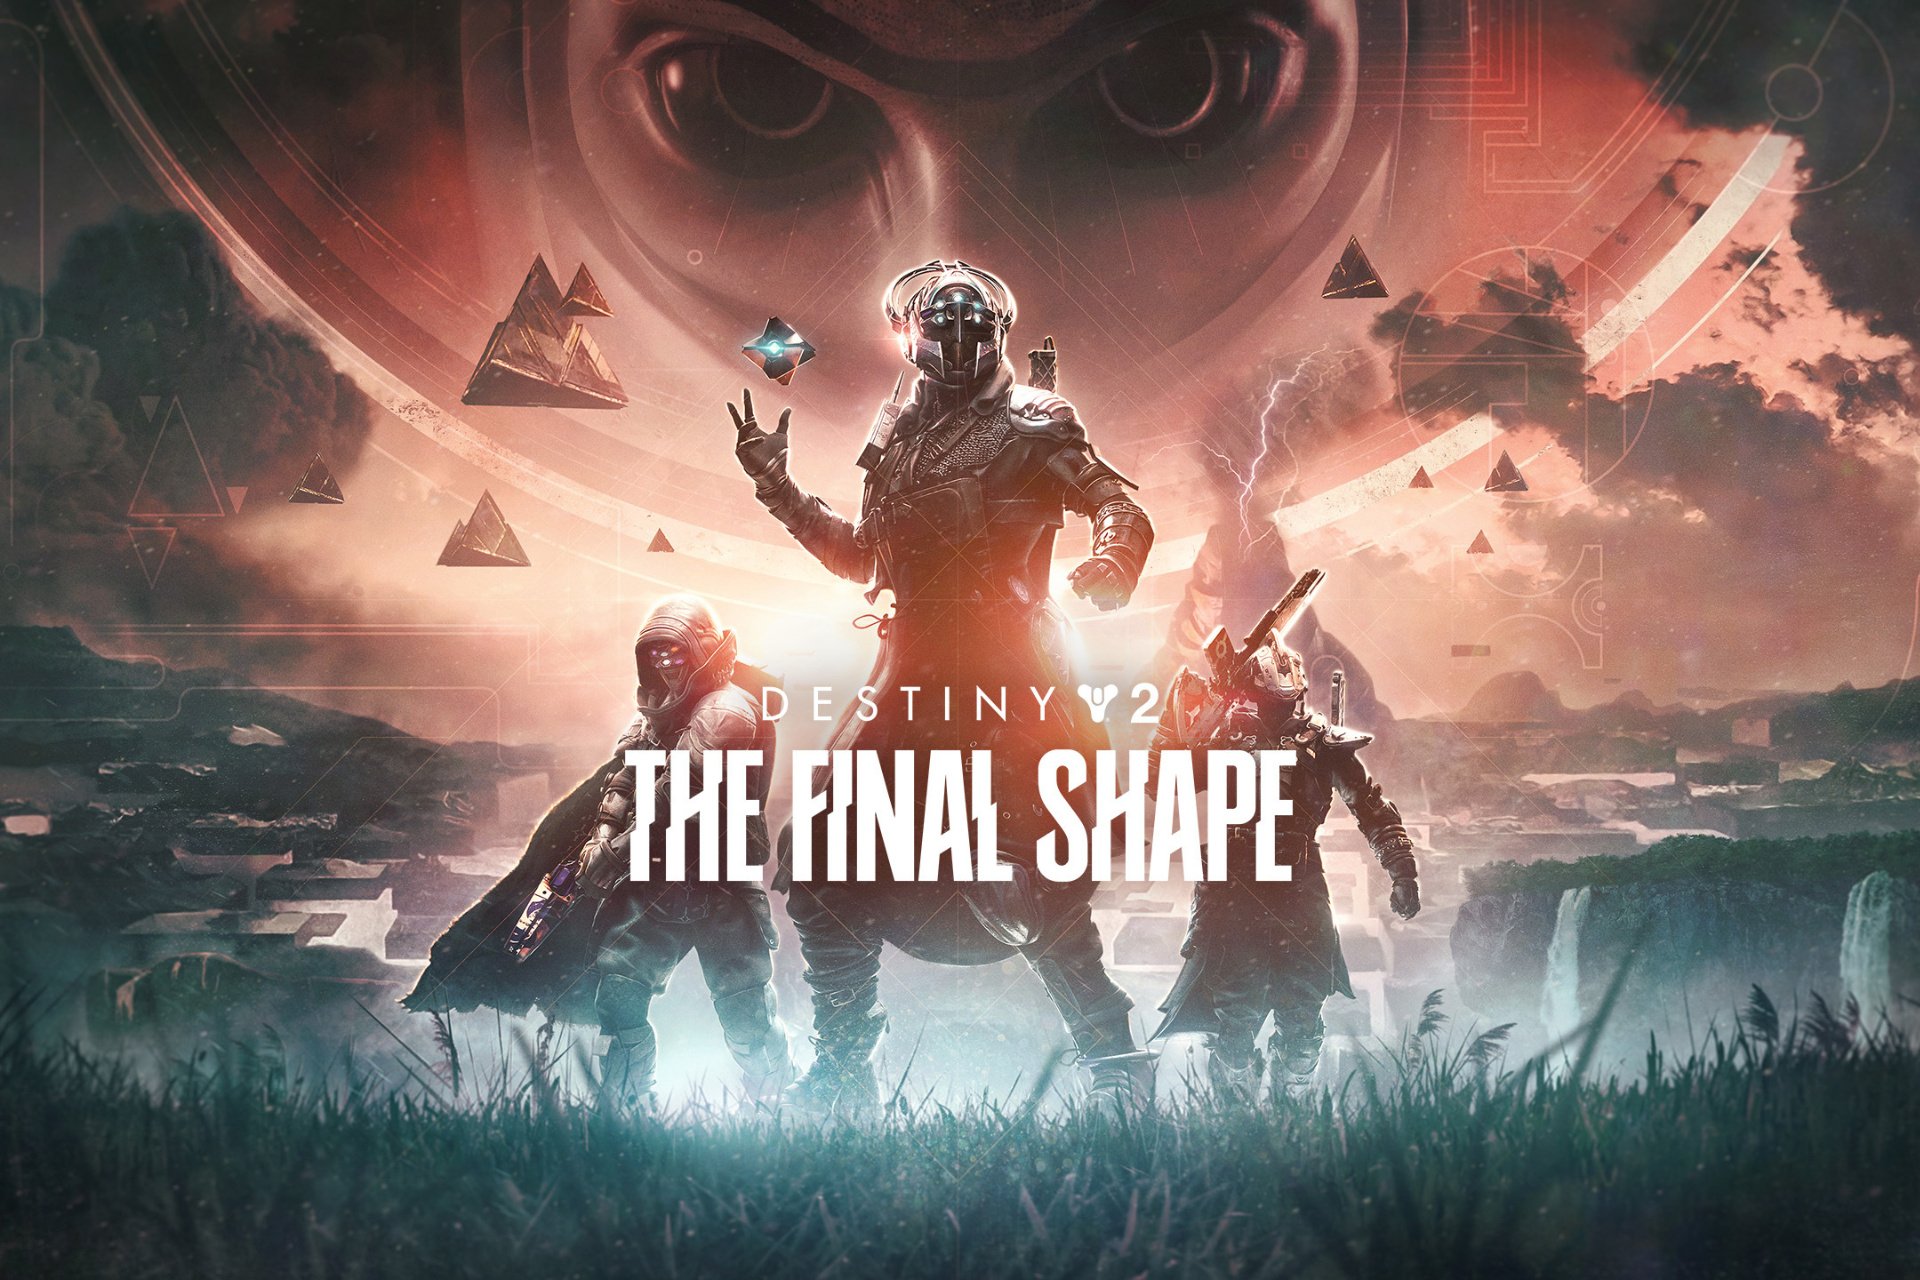 Destiny 2:: The Final Shape was launched